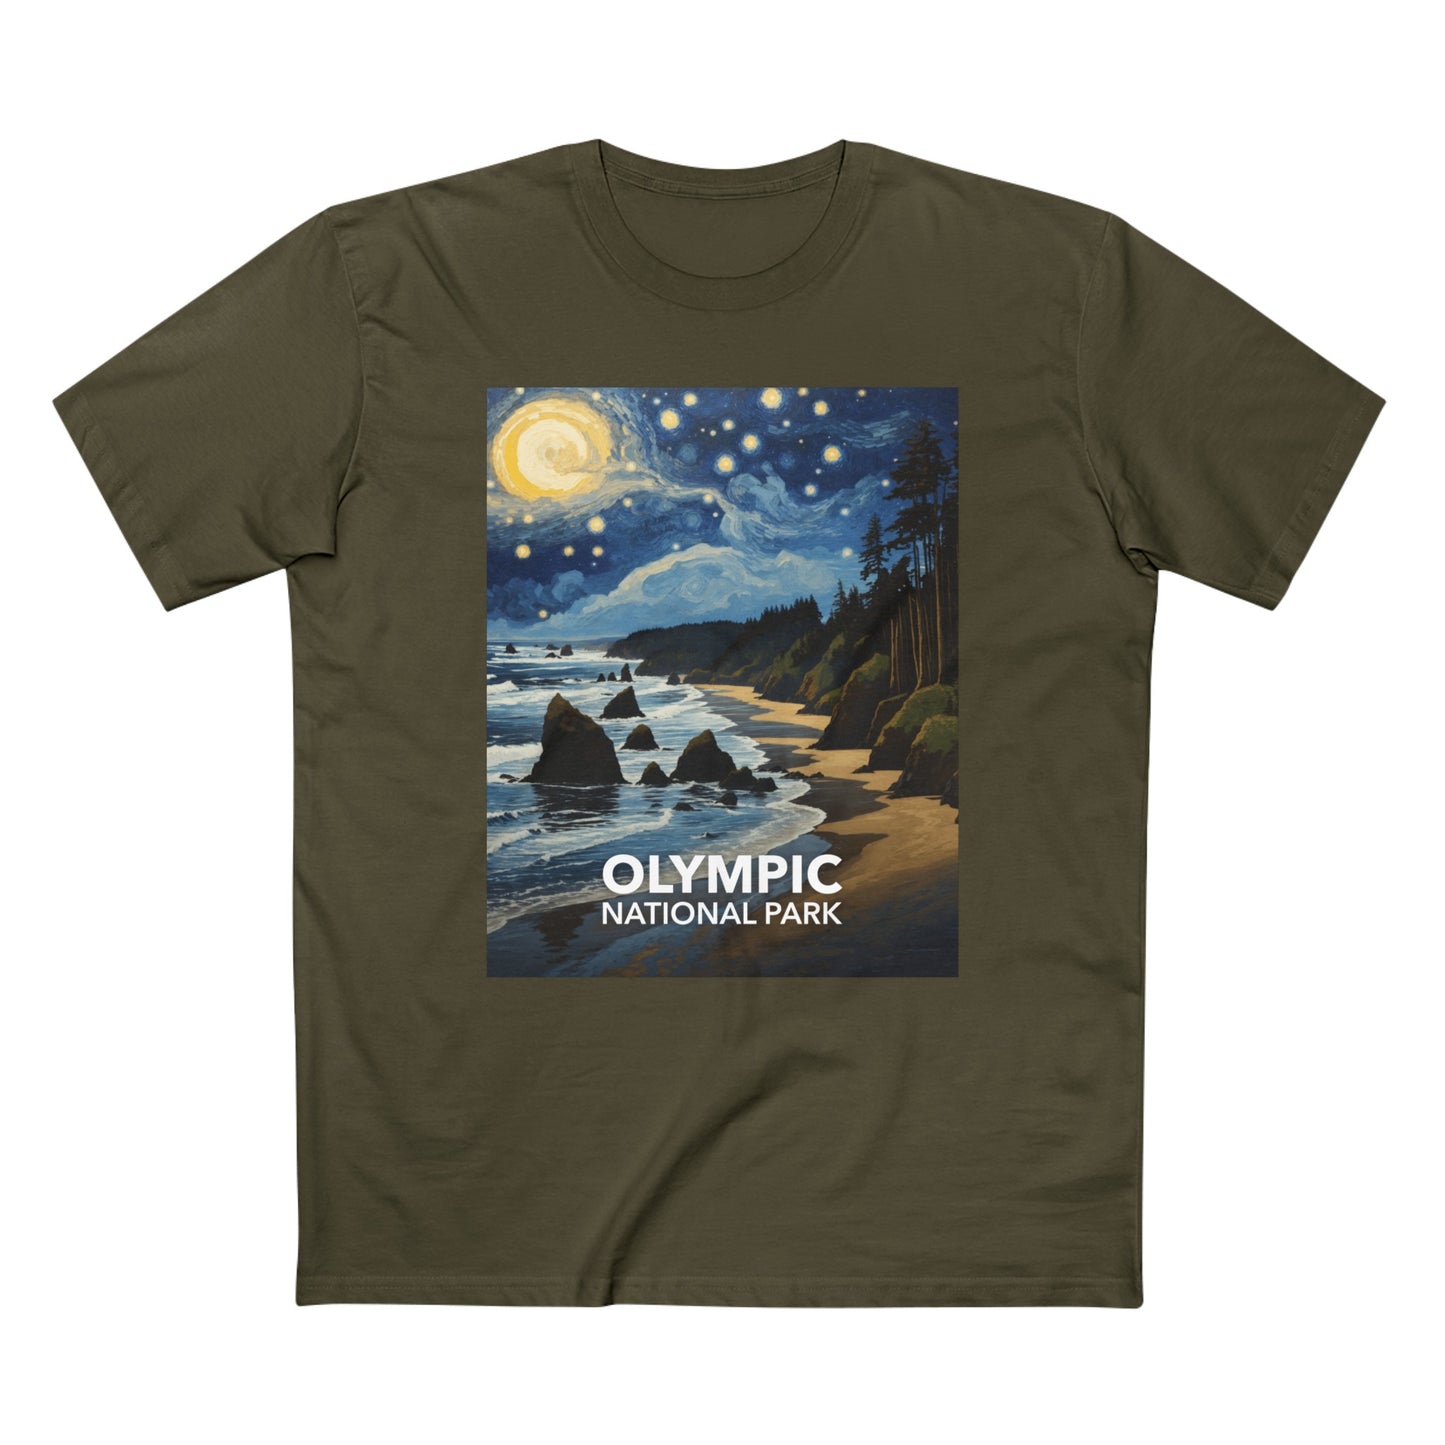 Olympic National Park T-Shirt - The Starry Night